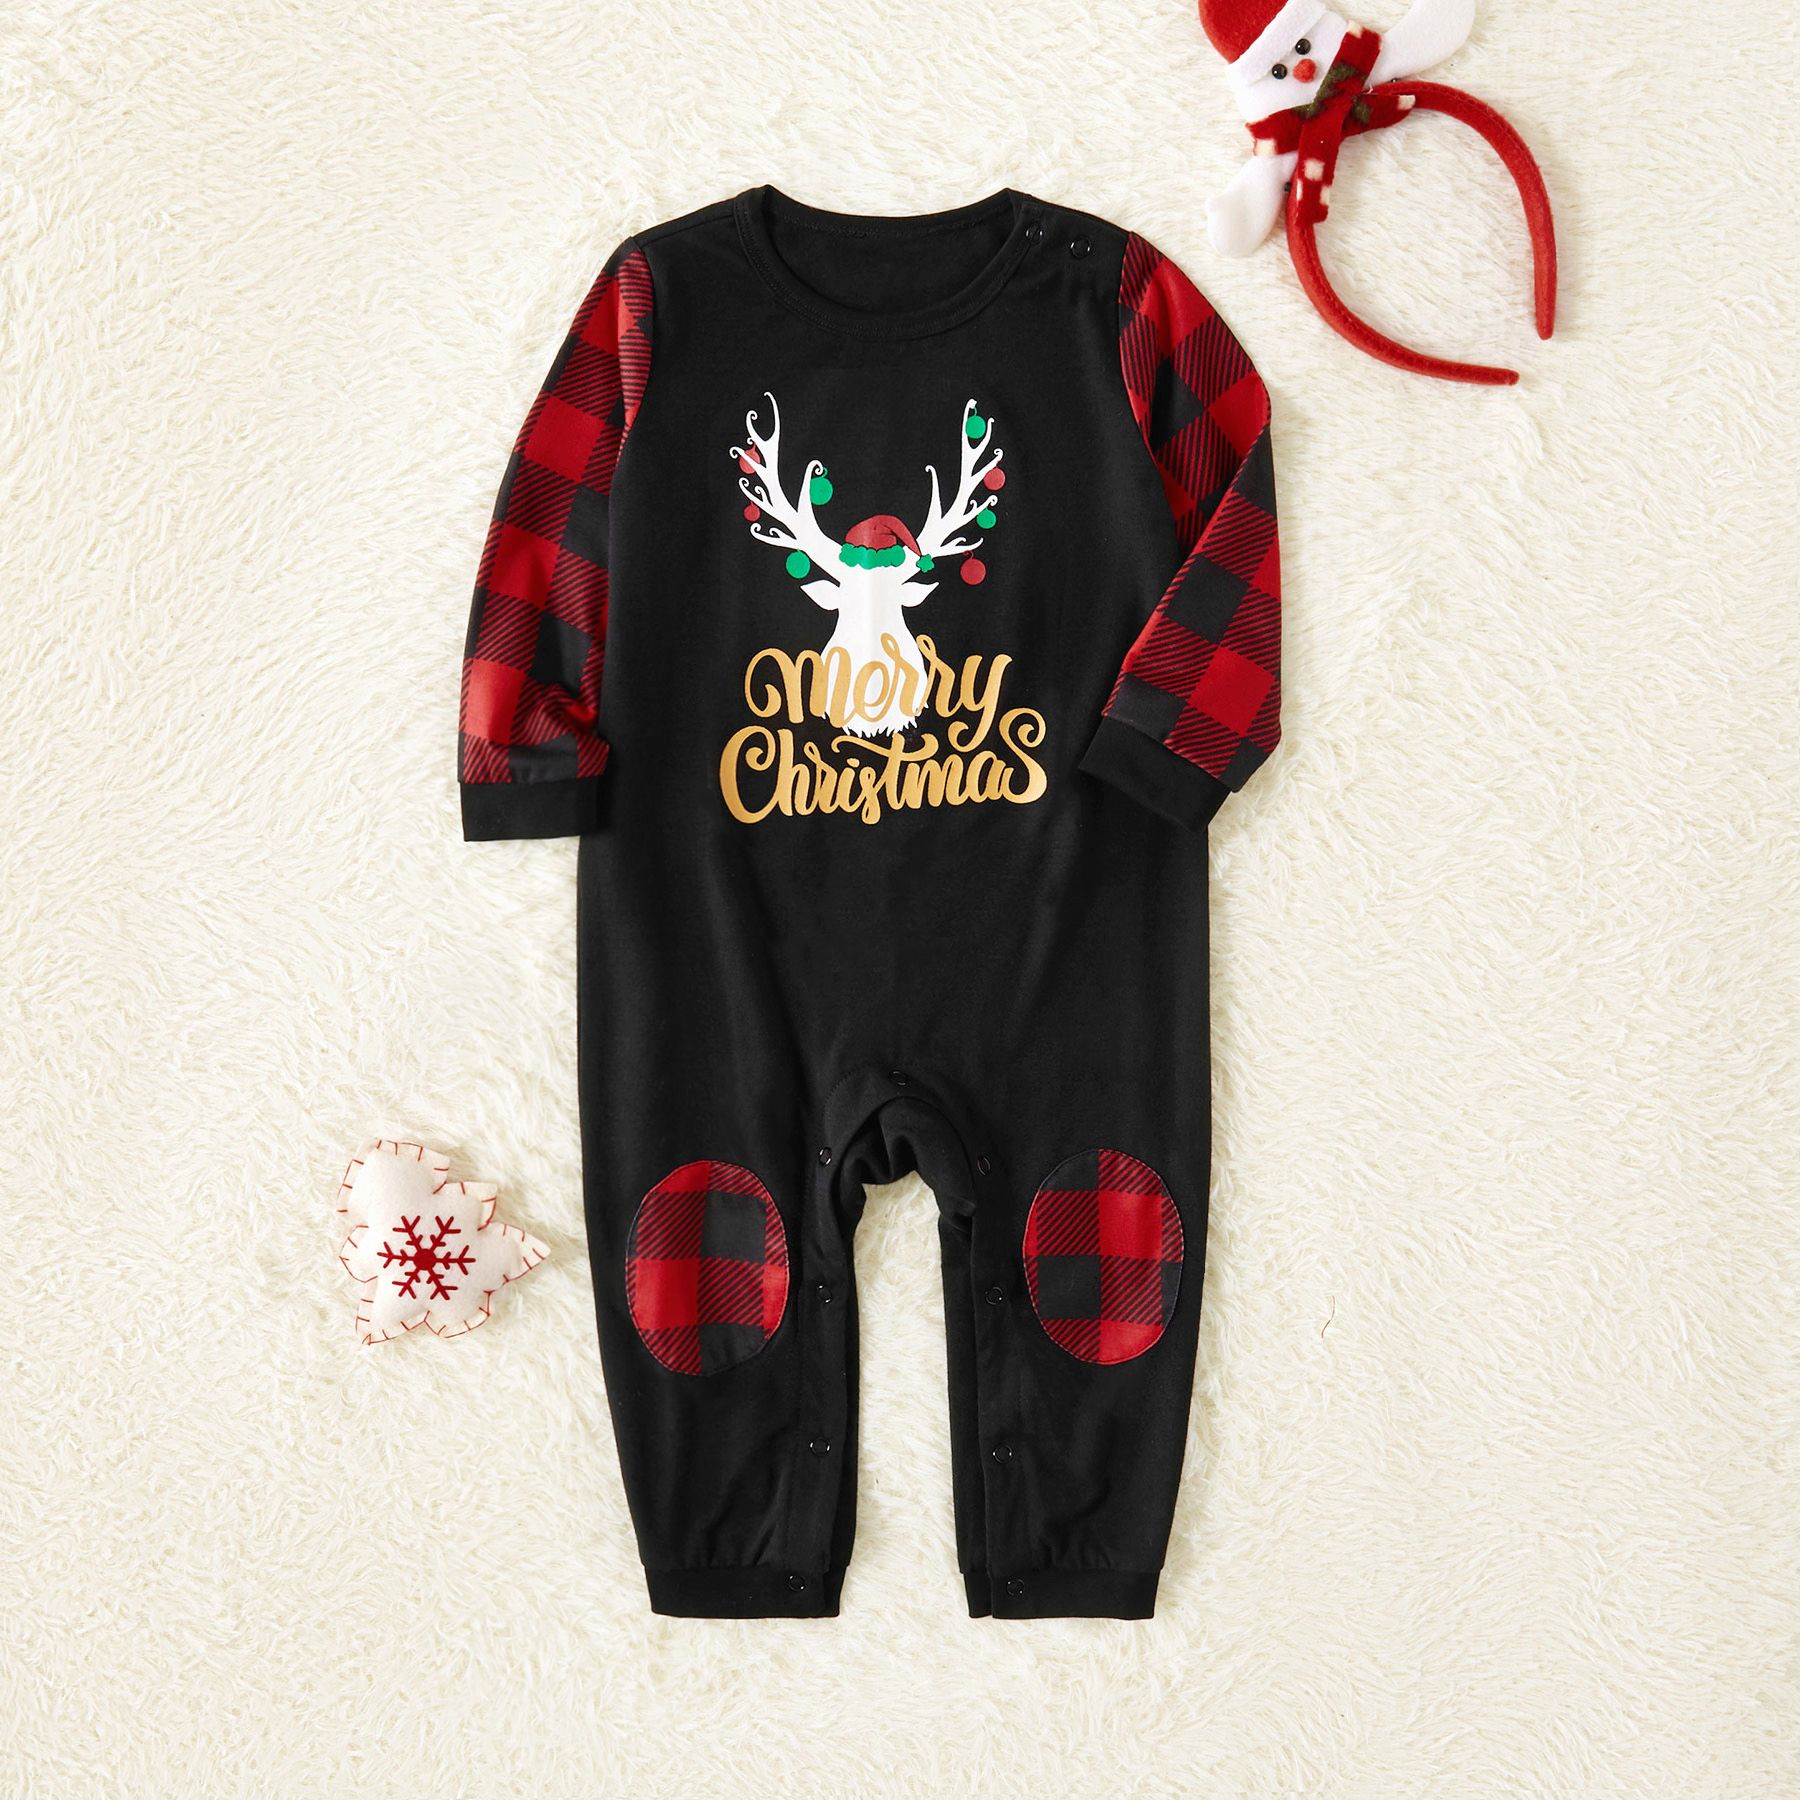 Merry Christmas Letter Antler Print Plaid Splice Matching Pajamas Sets For Family (Flame Resistant)